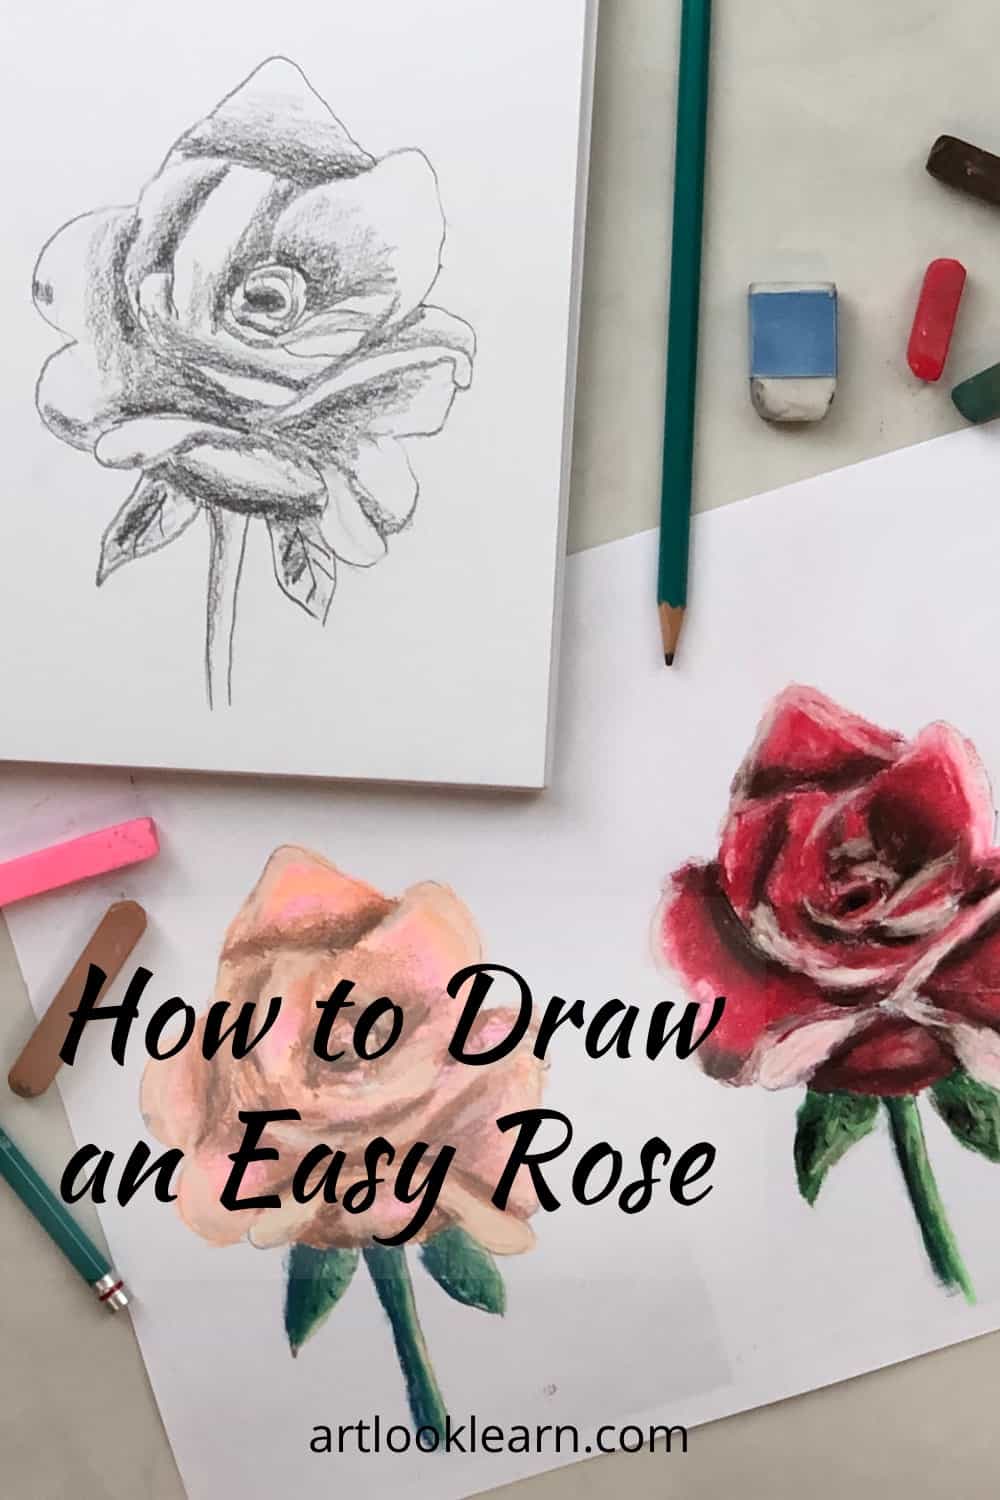 How to Draw a Rose by Hand: Easy Process, Realistic Blooms | Skillshare Blog